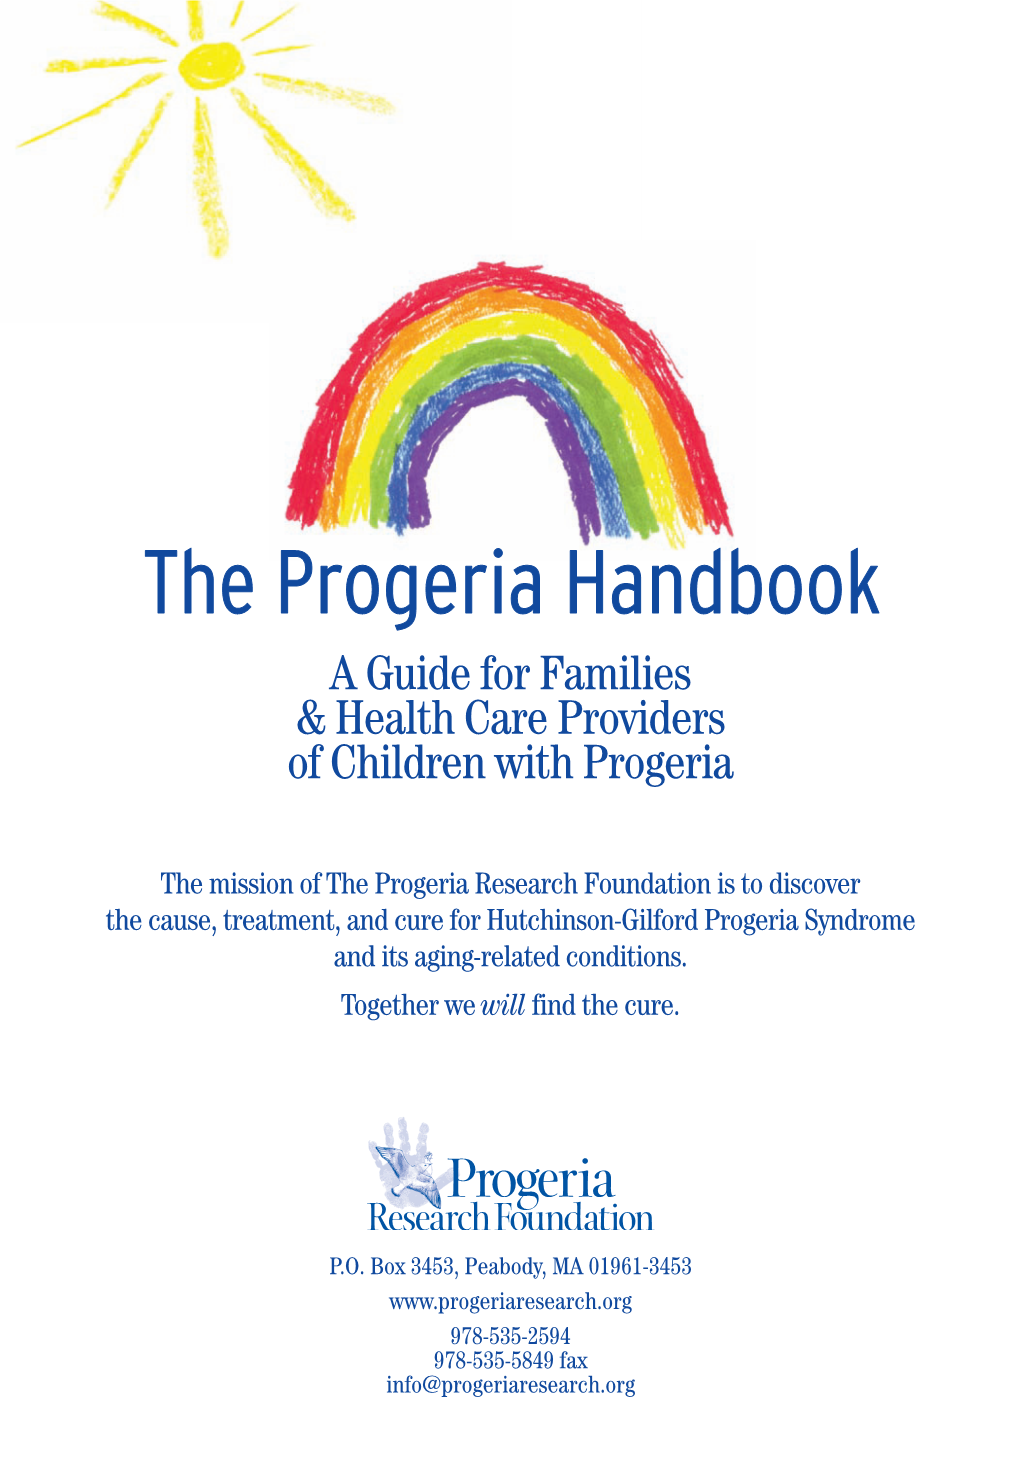 The Progeria Handbook: a Guide for Families & Health Care Providers Of